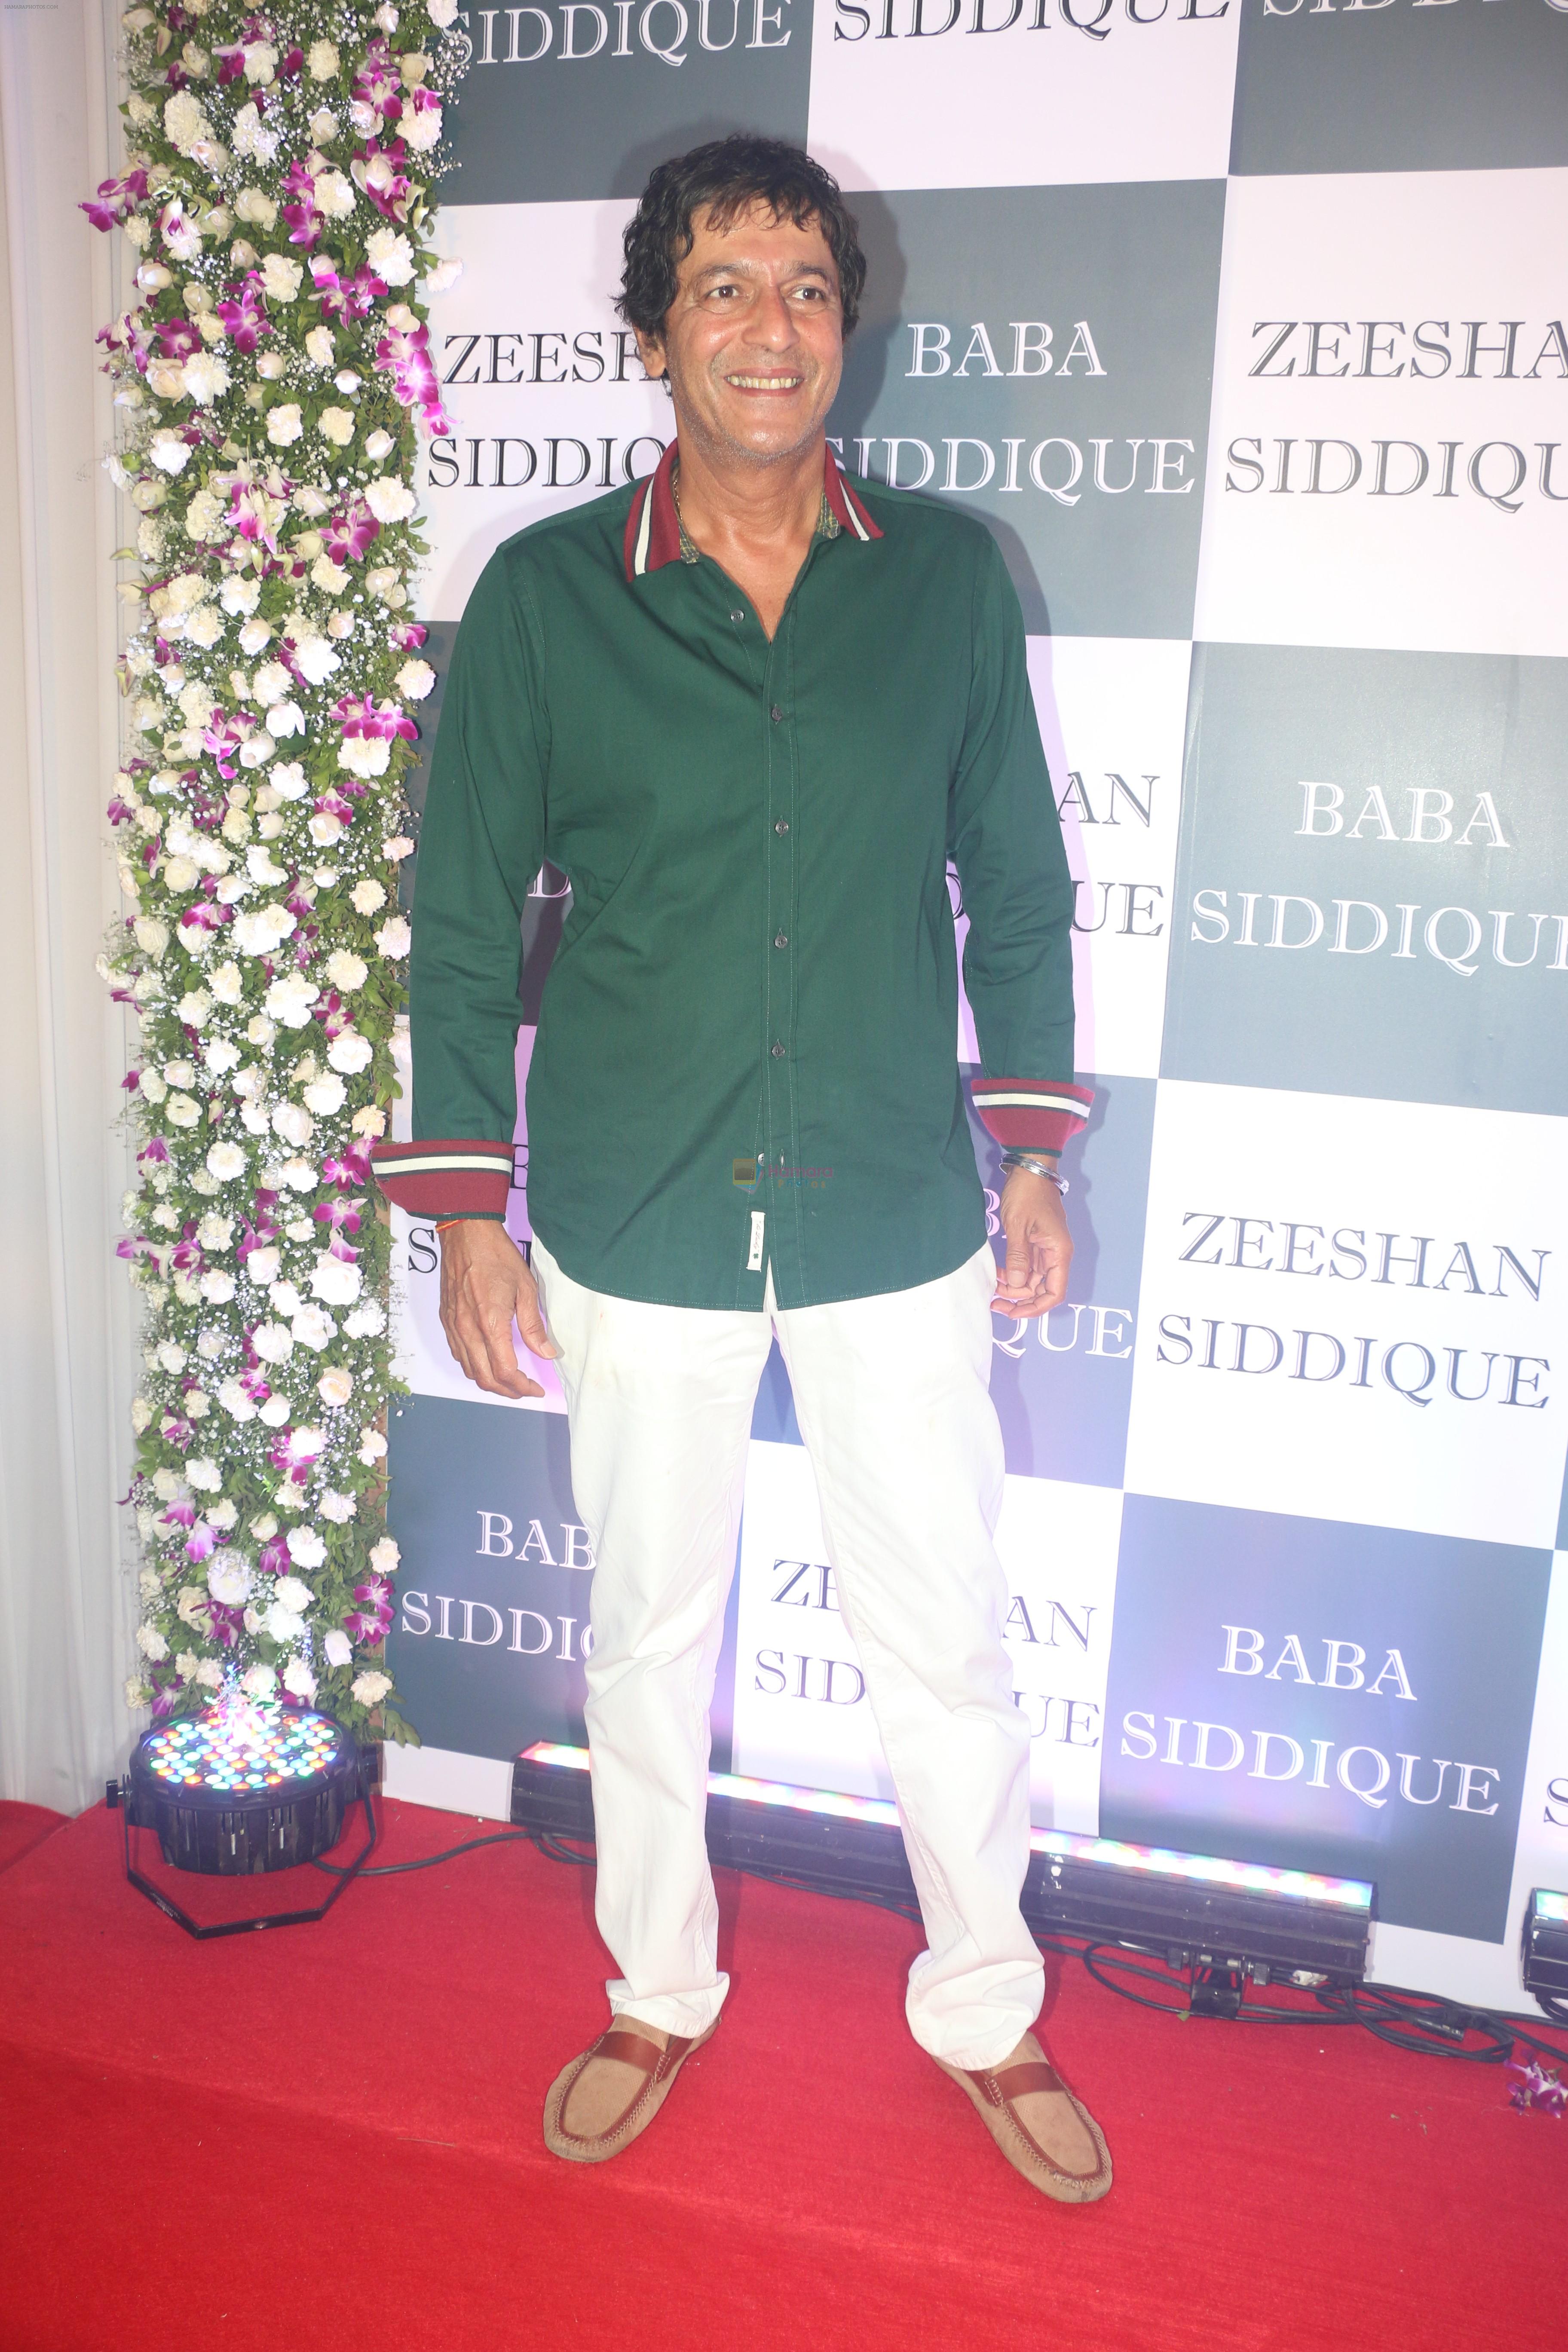 Chunky Pandey at Baba Siddiqui iftaar party in Taj Lands End bandra on 2nd June 2019